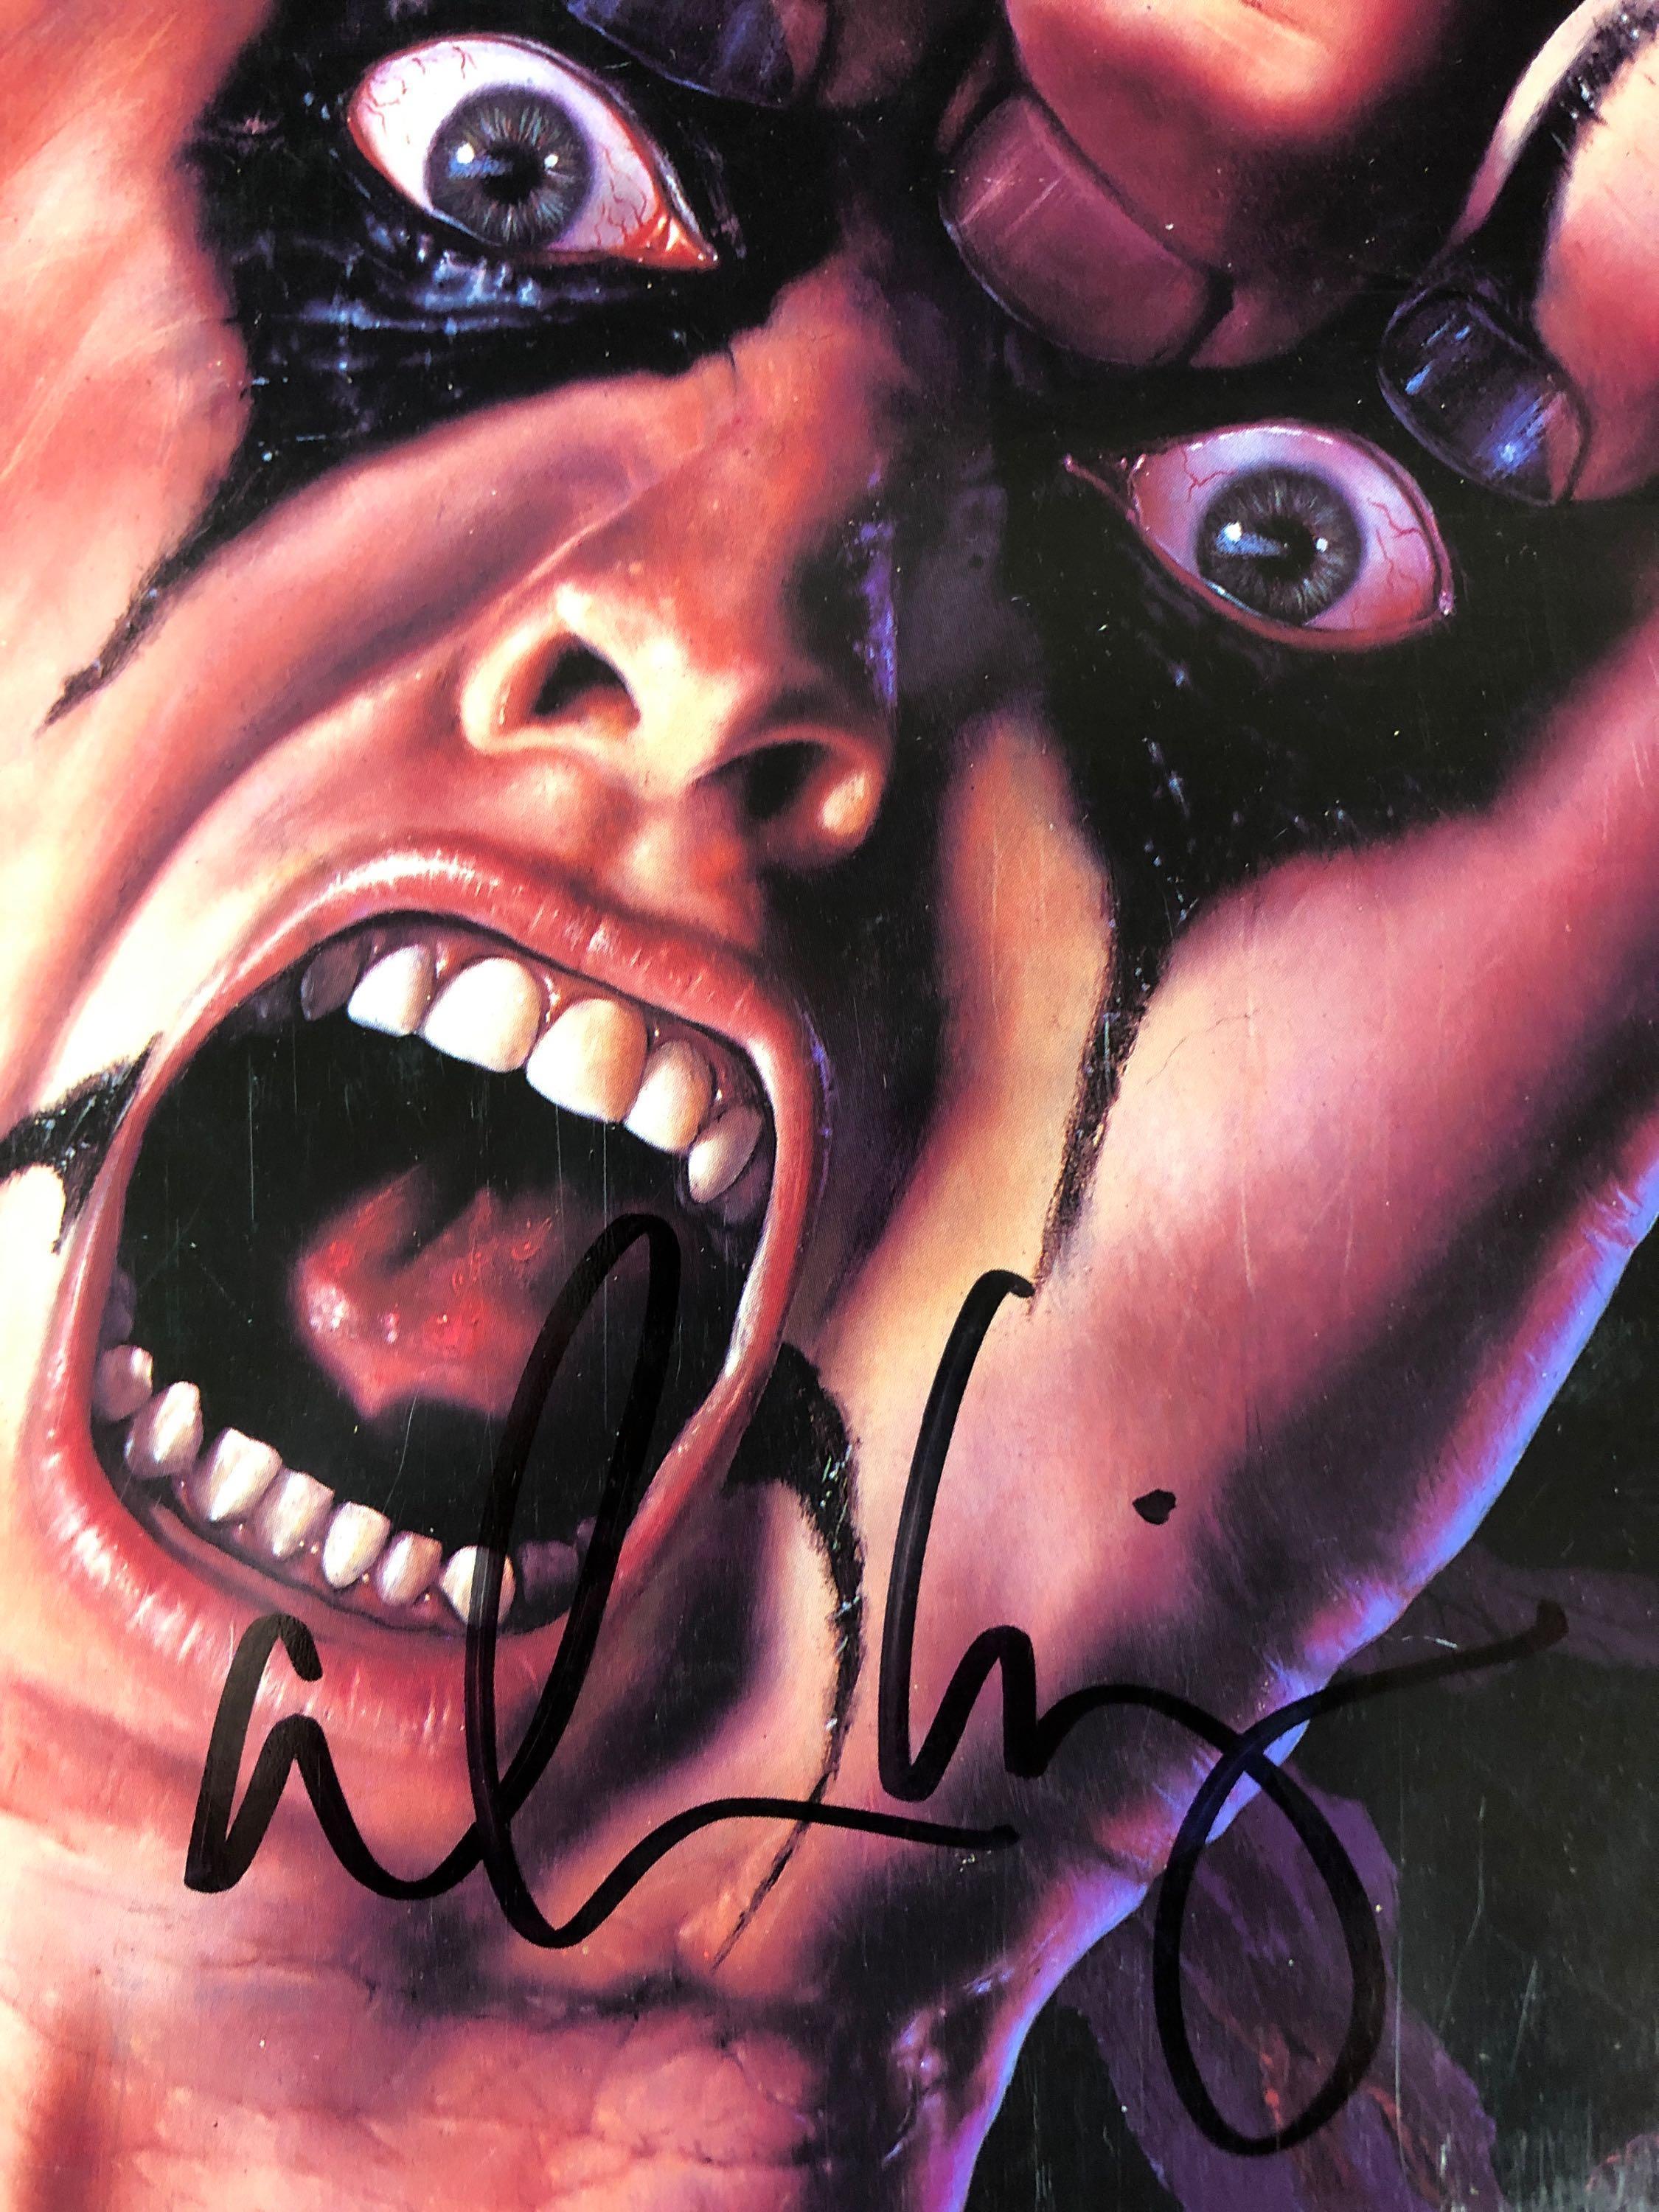 Alice Cooper "Raise Your Fist and Yell" Autographed Album